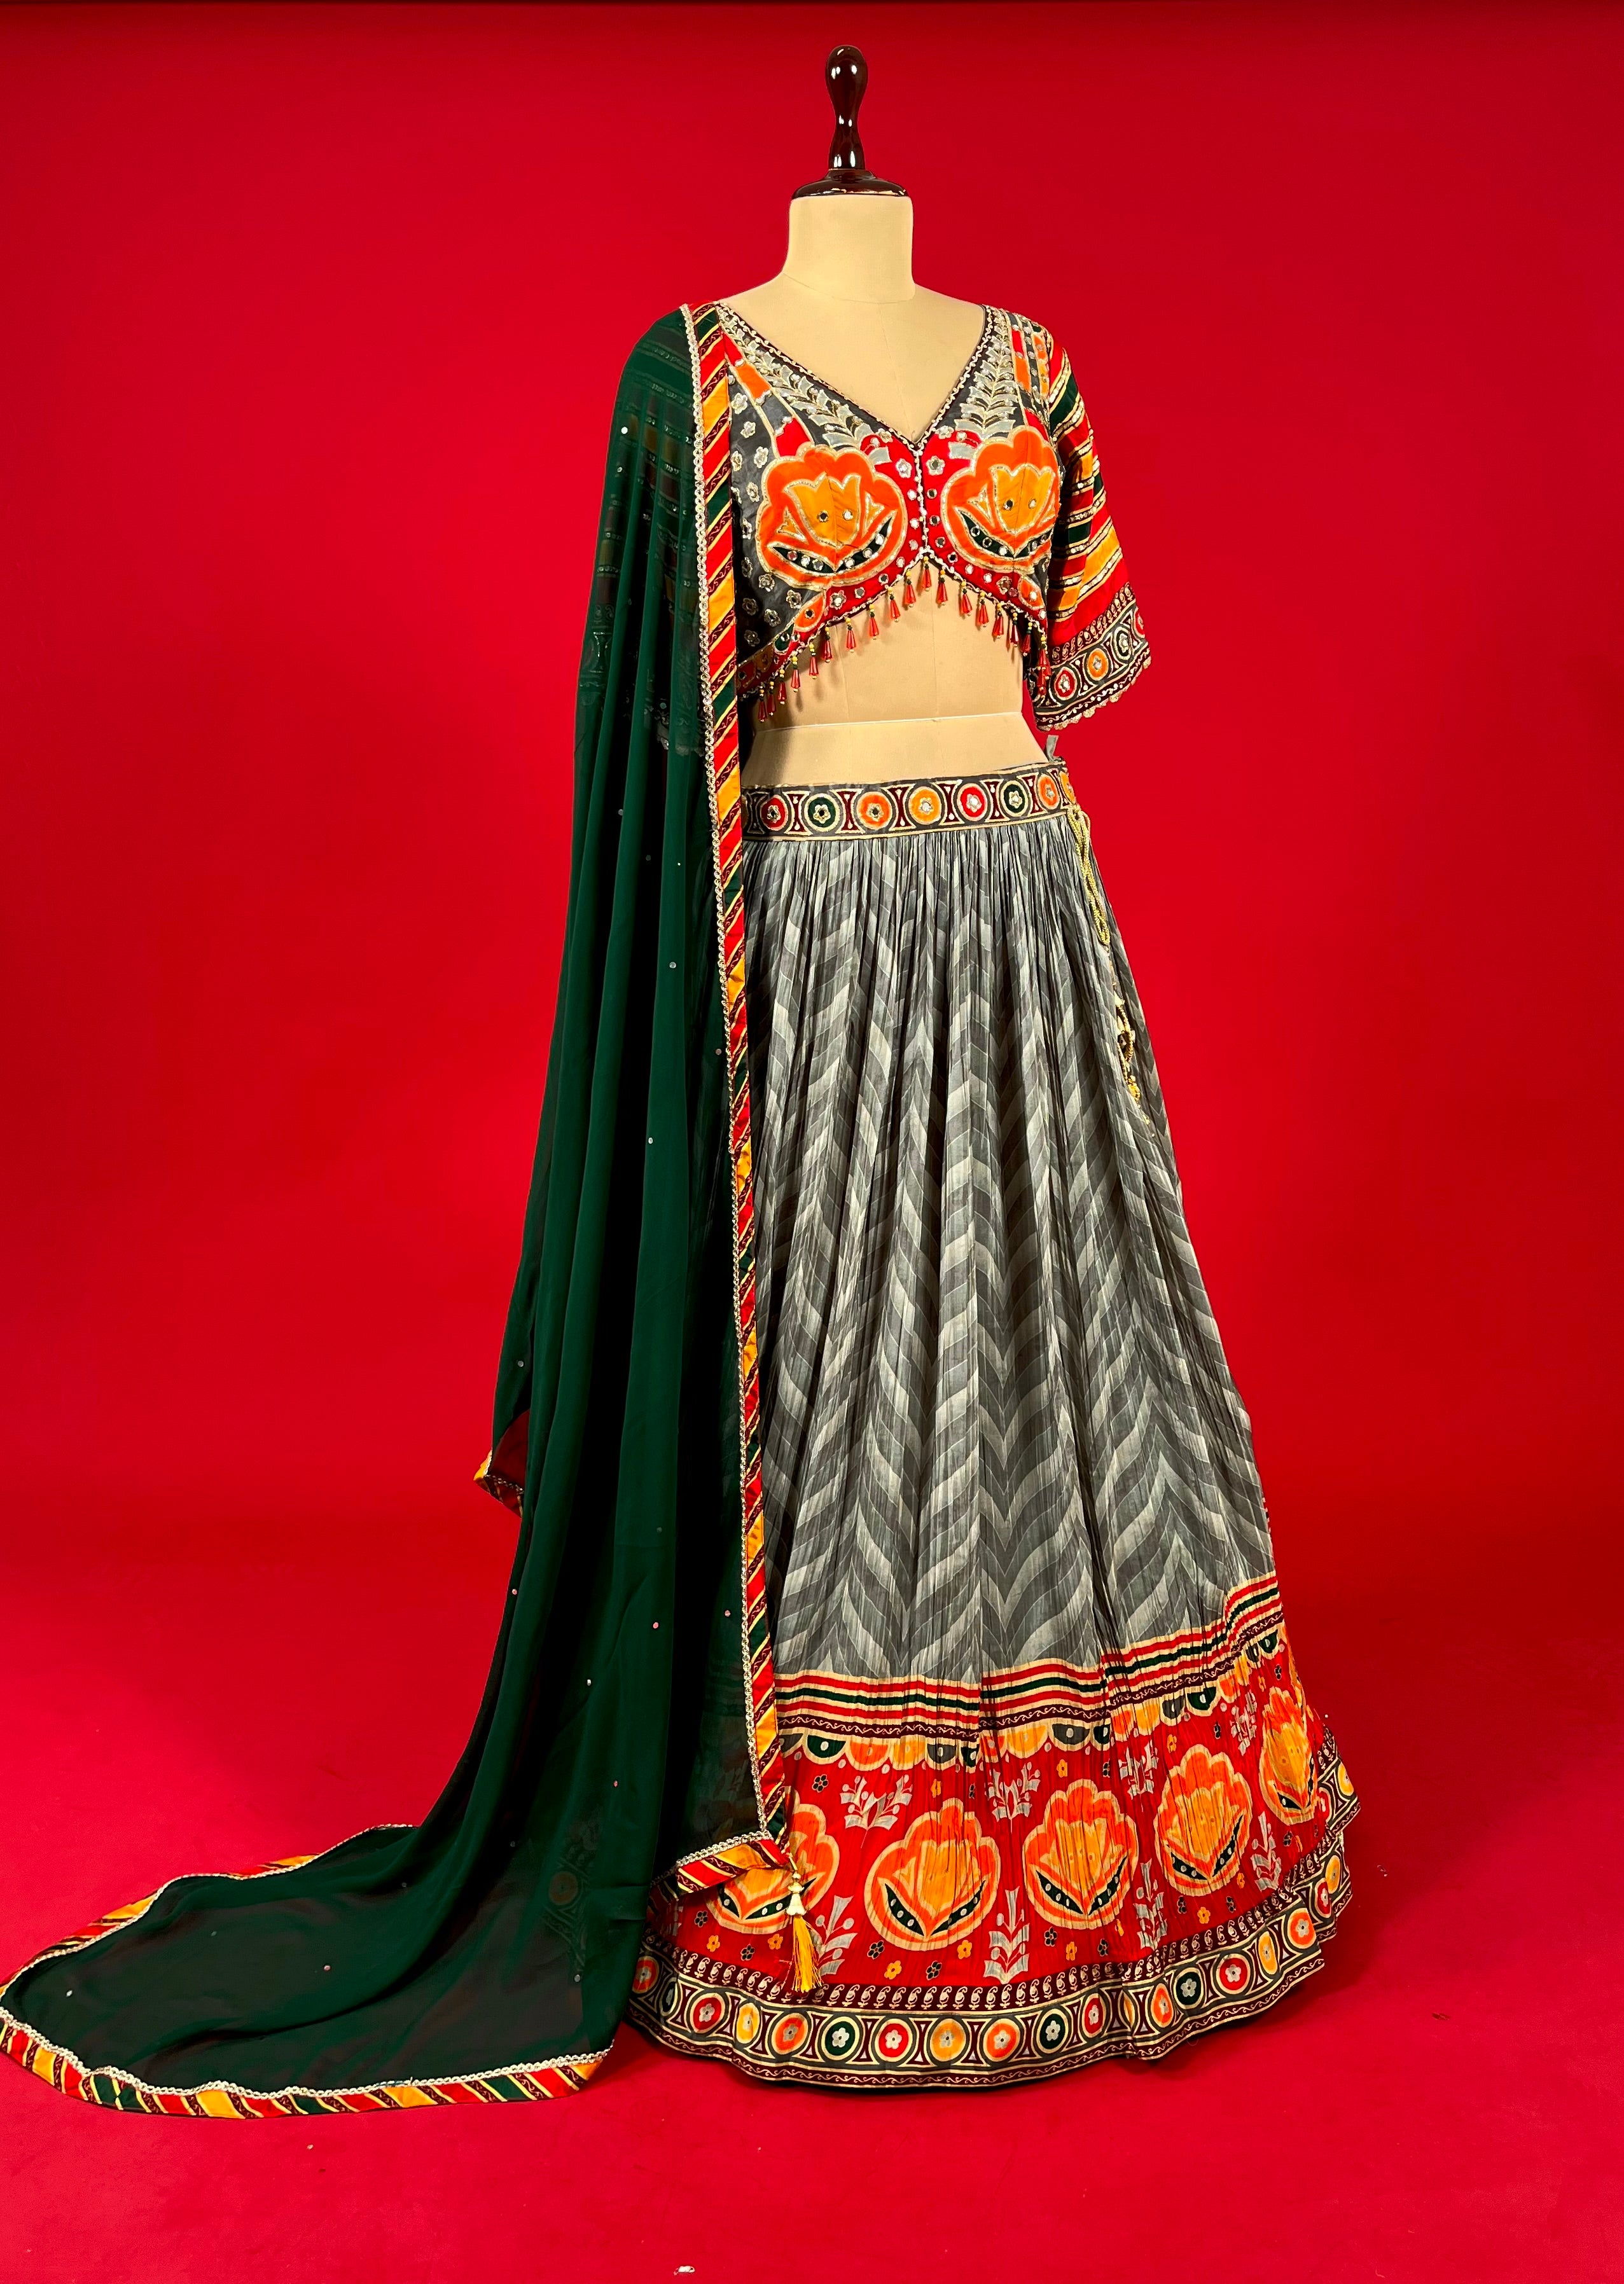 SILVER GREY LEHENGA SET WITH 3D CUTWORK AND GEOMETRICAL PATTERNS PAIRED  WITH A MATCHING BLOUSE AND DUPATTA. - Seasons India